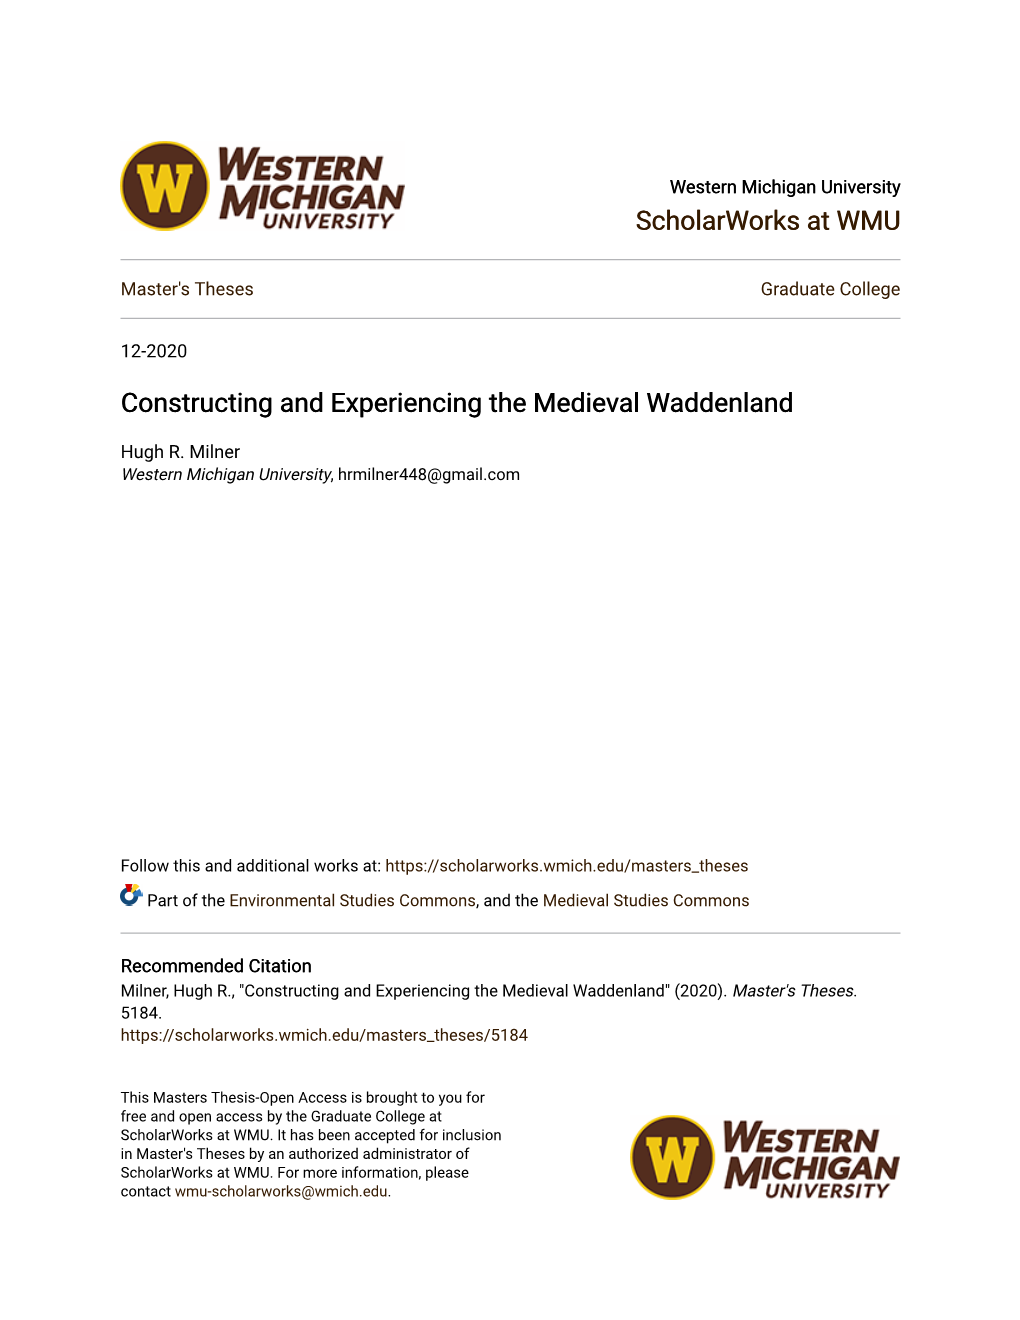 Constructing and Experiencing the Medieval Waddenland